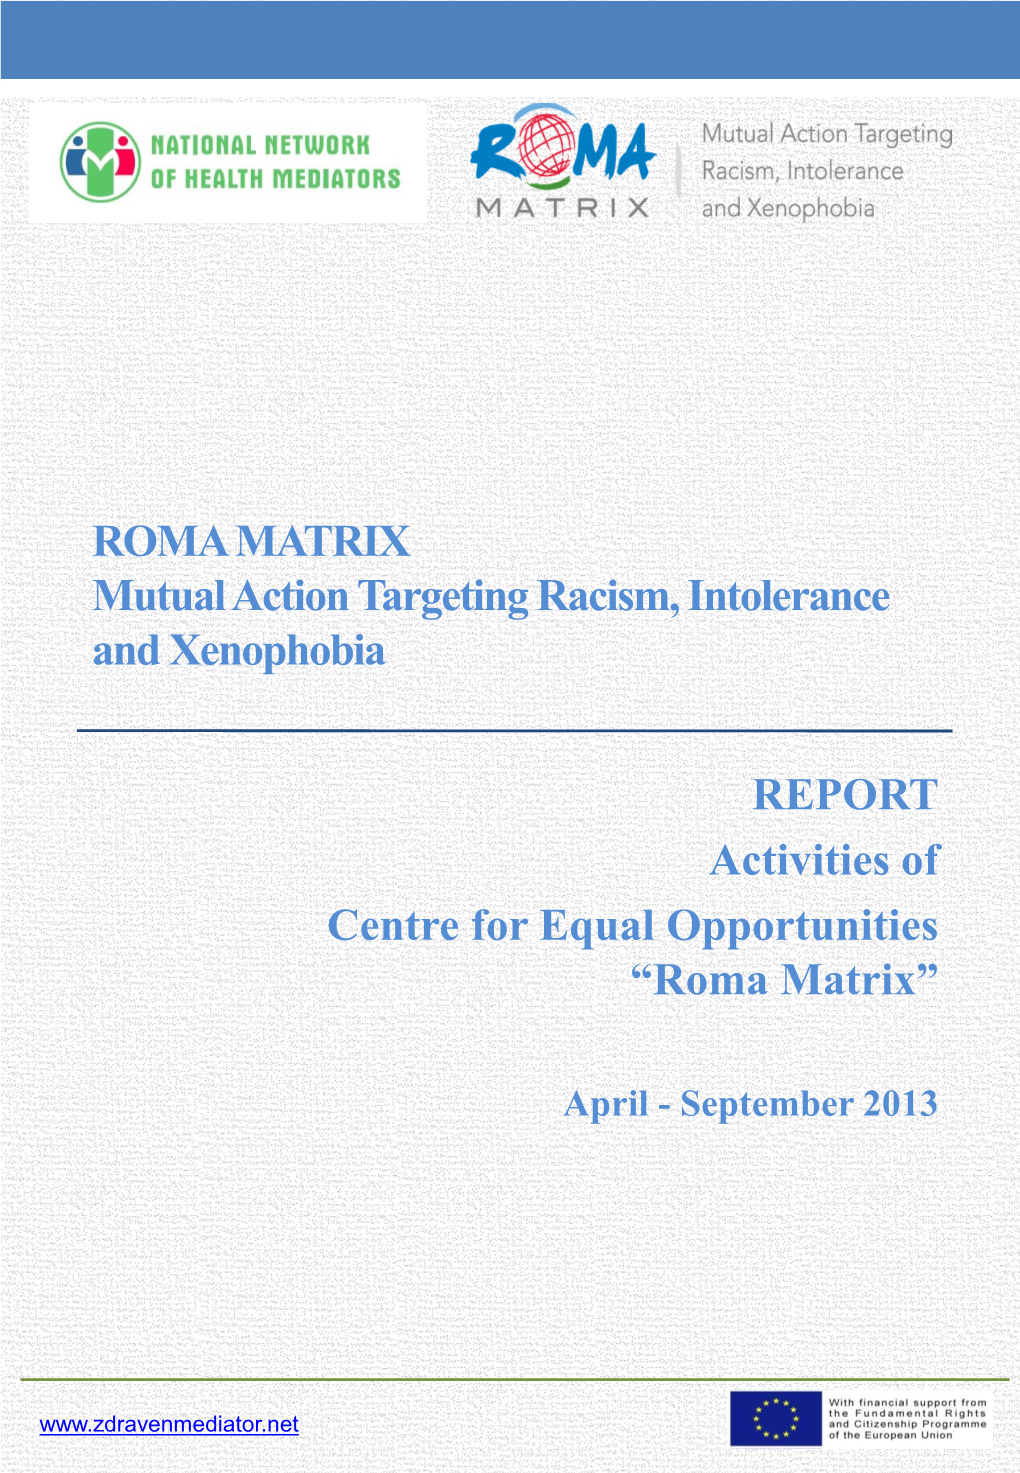 ROMA MATRIX Mutual Action Targeting Racism, Intolerance Аnd Xenophobia